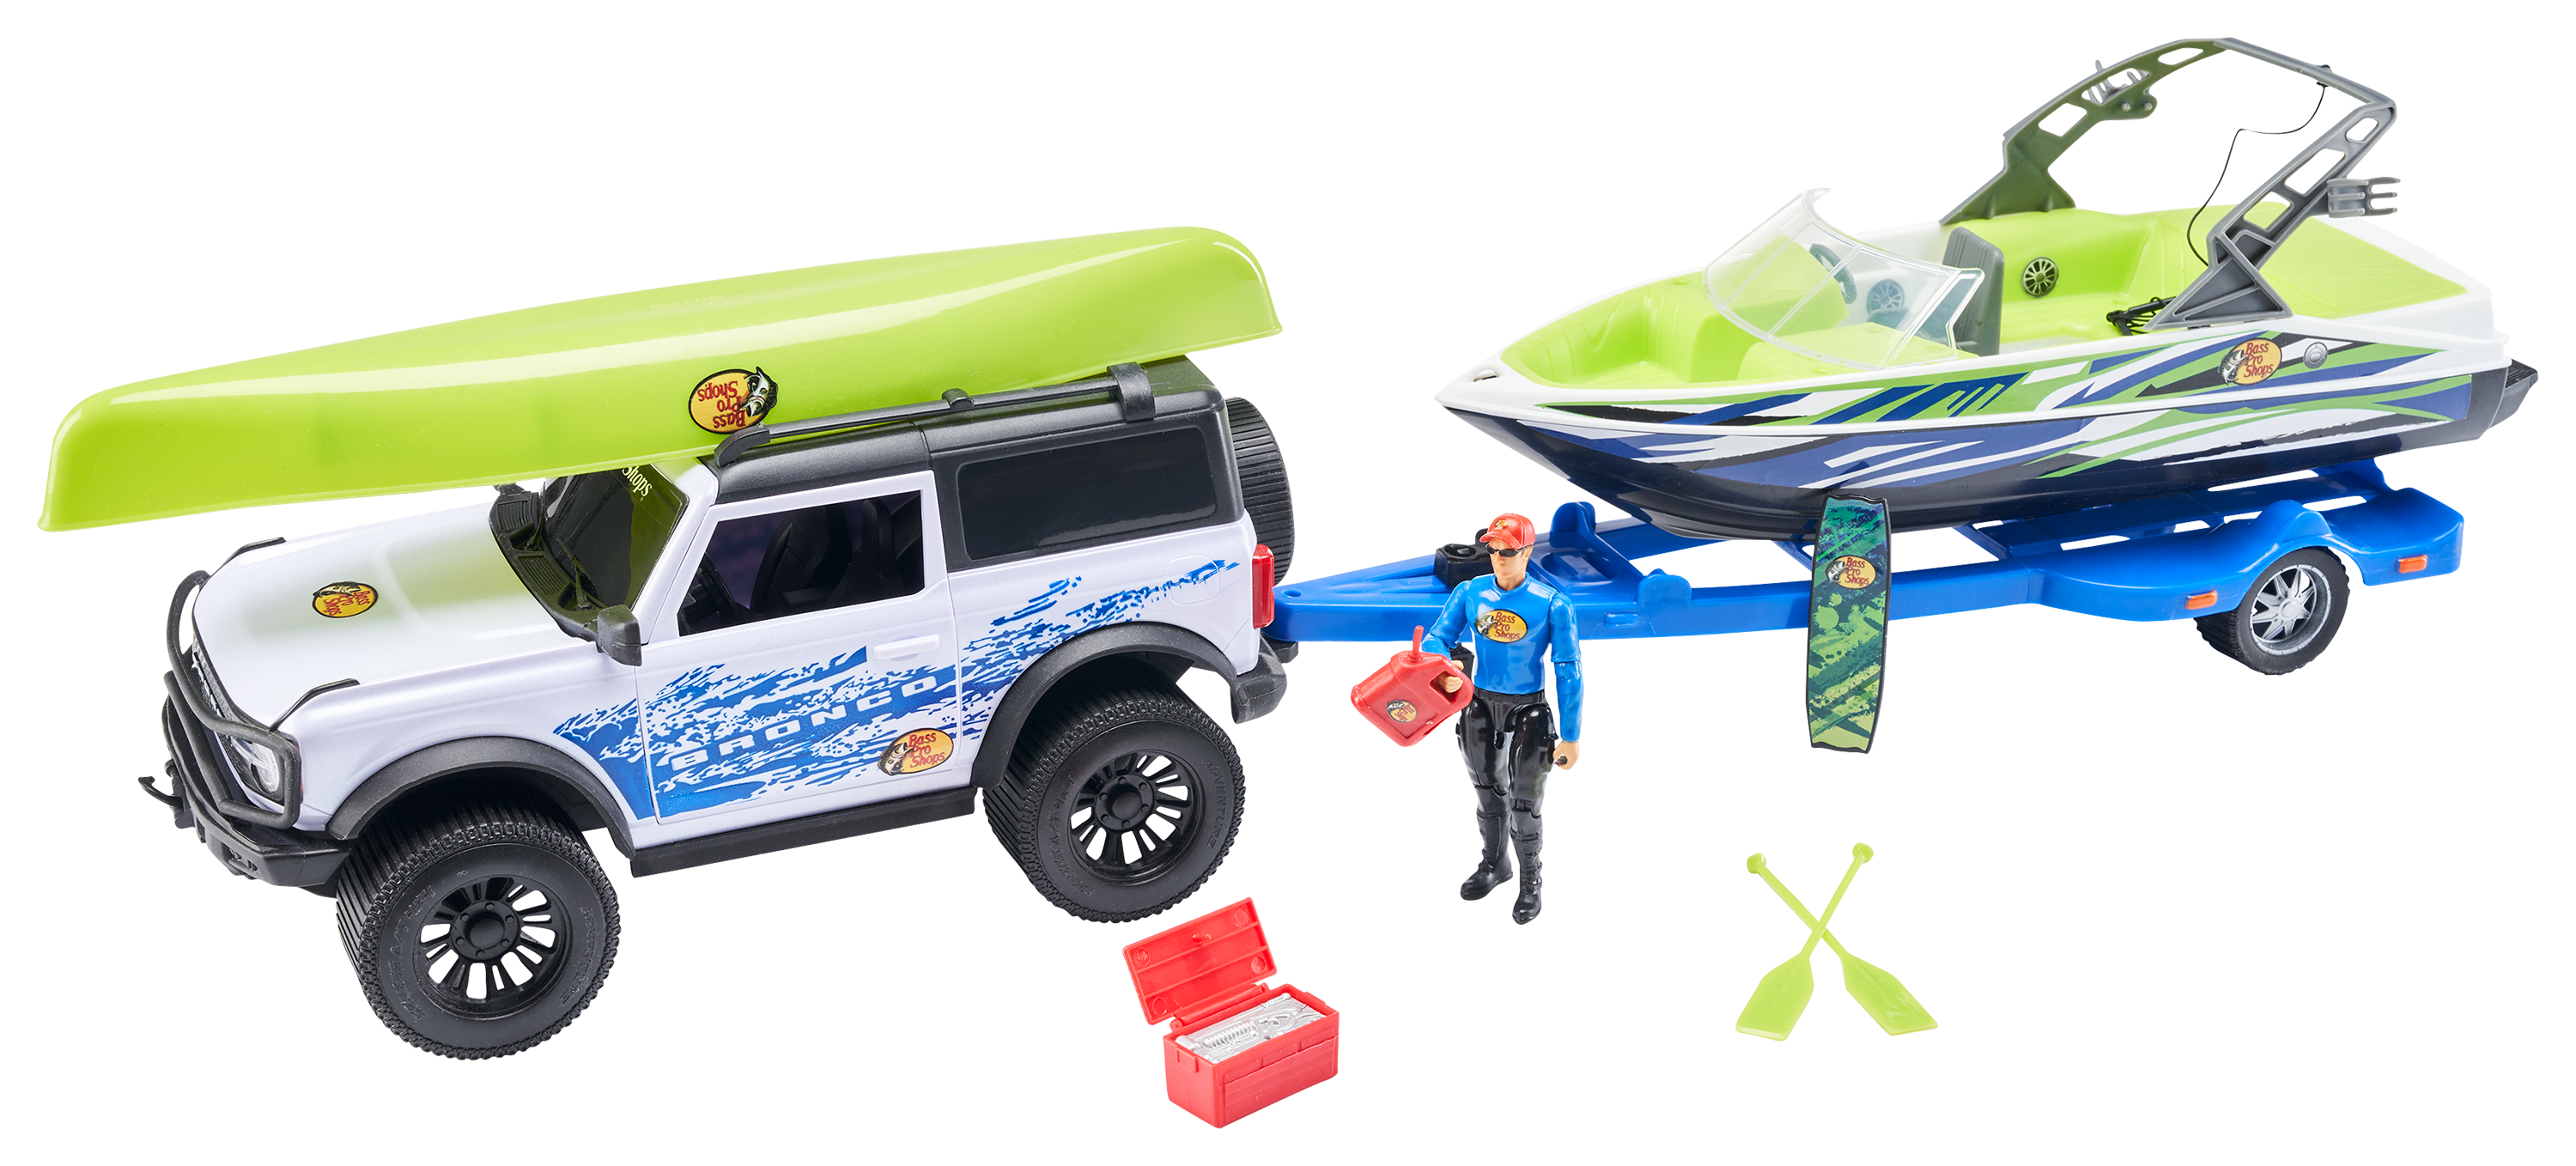 Toys at Bass Pro Shop - Action figure, truck and boat set. 